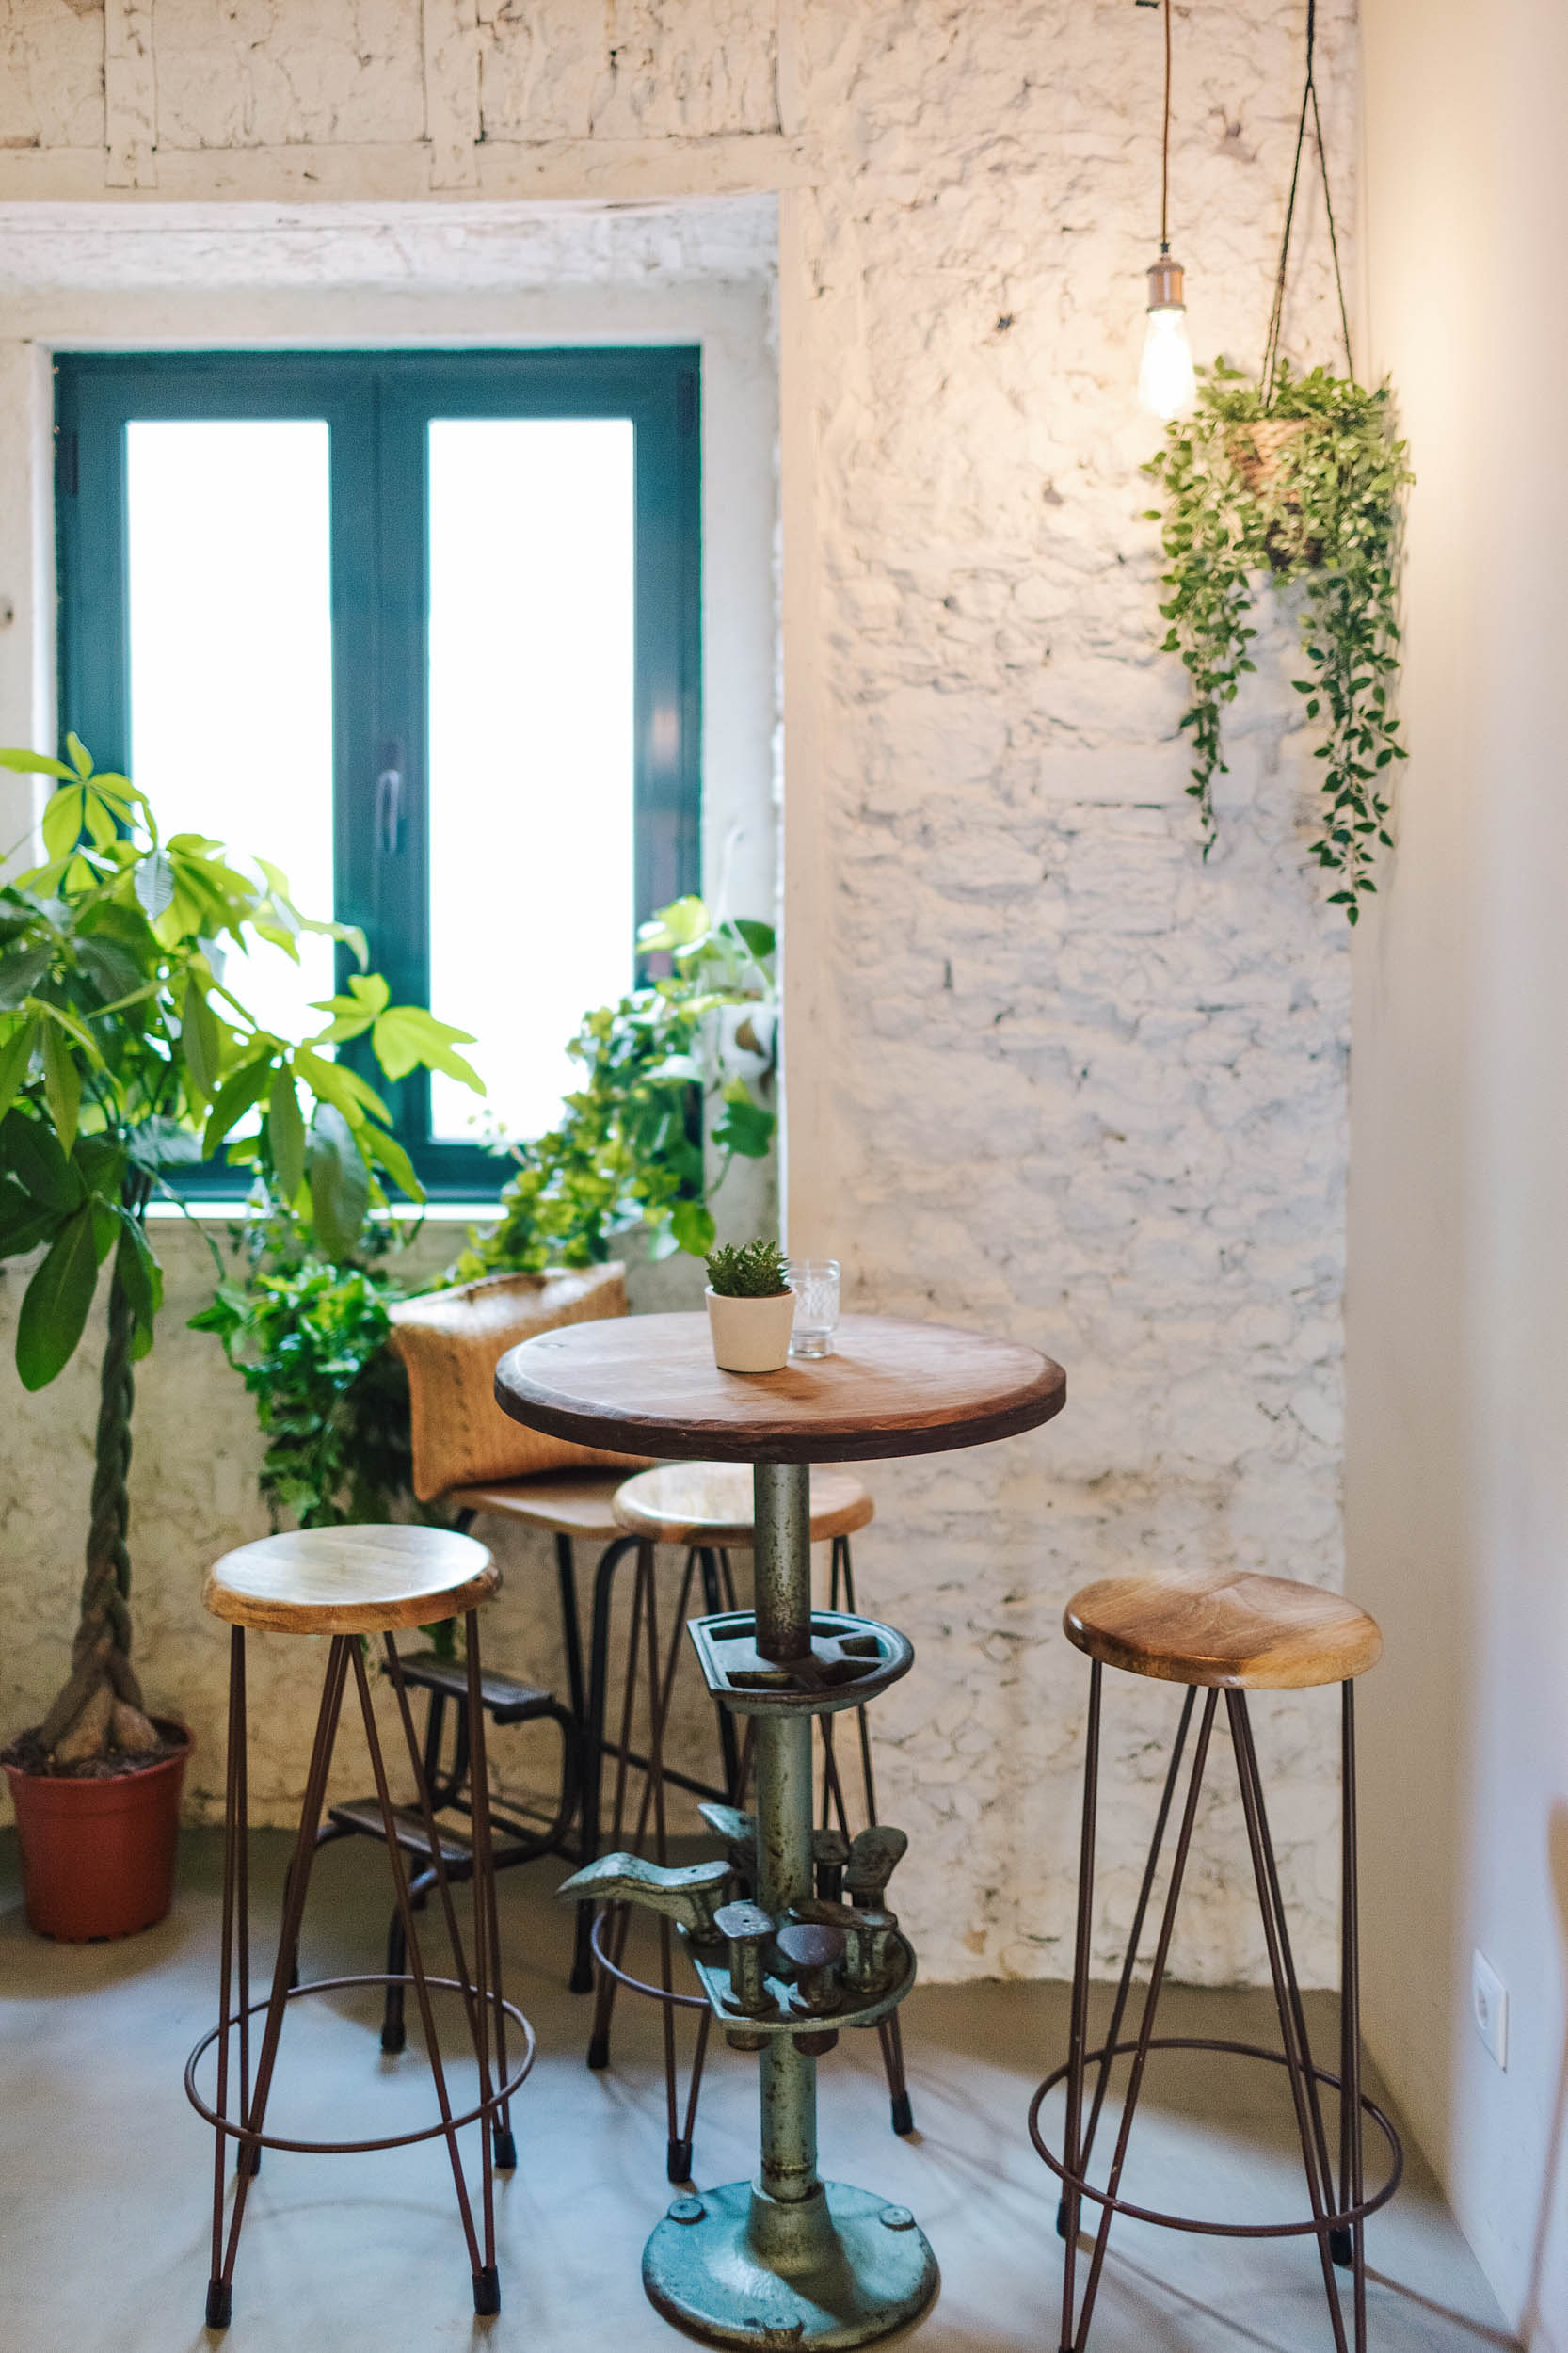 Fauna & Flora in Lisbon is a delicious and healthy restaurant option